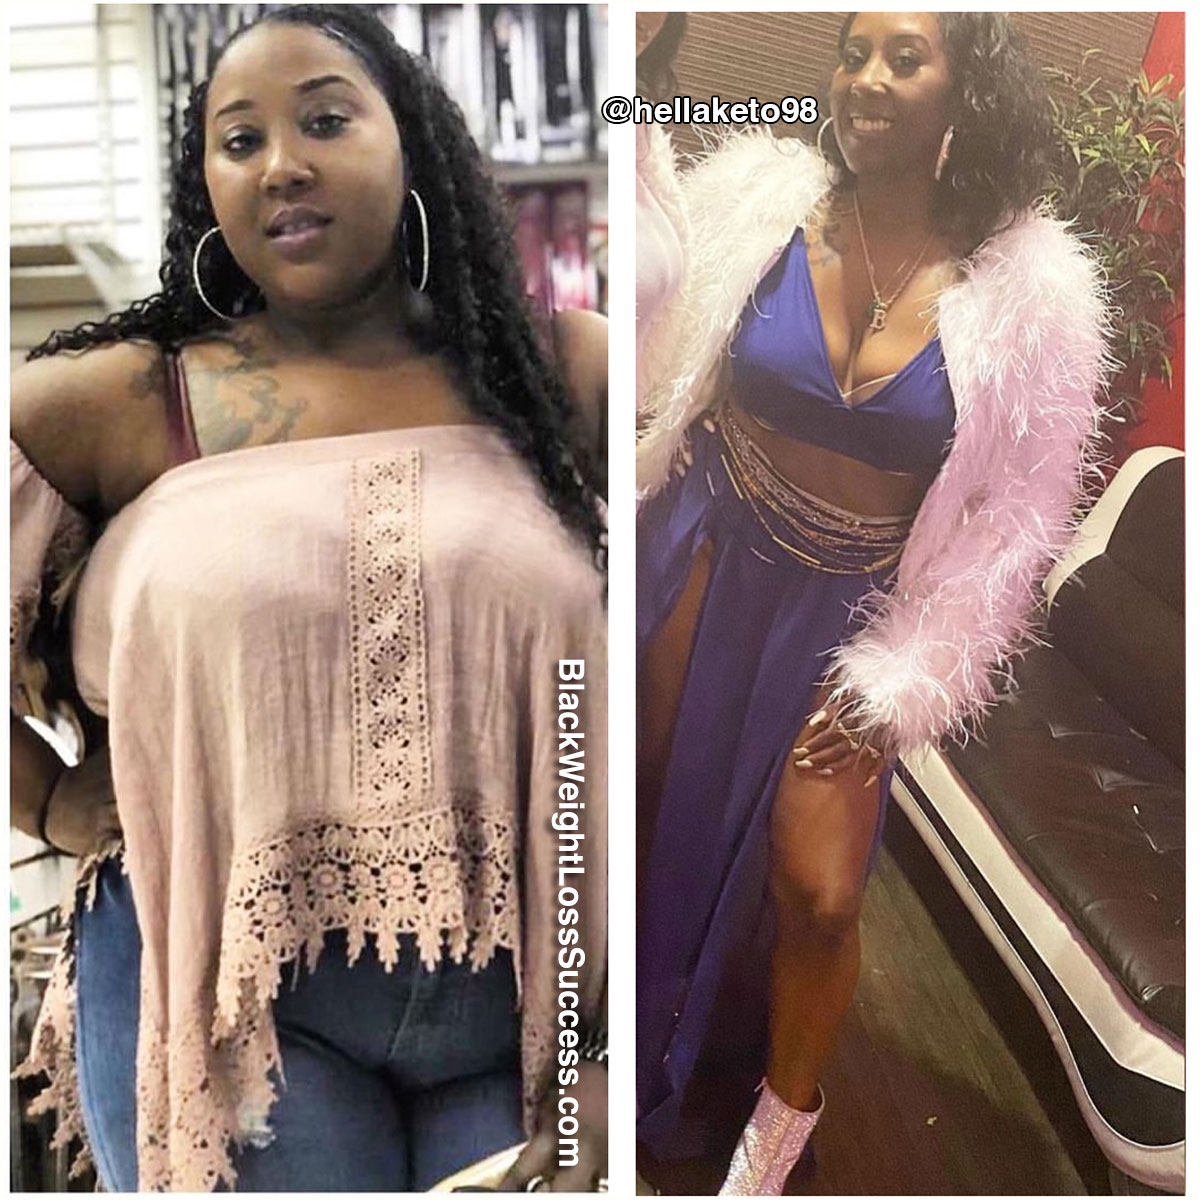 Jazmyn before and after weight loss